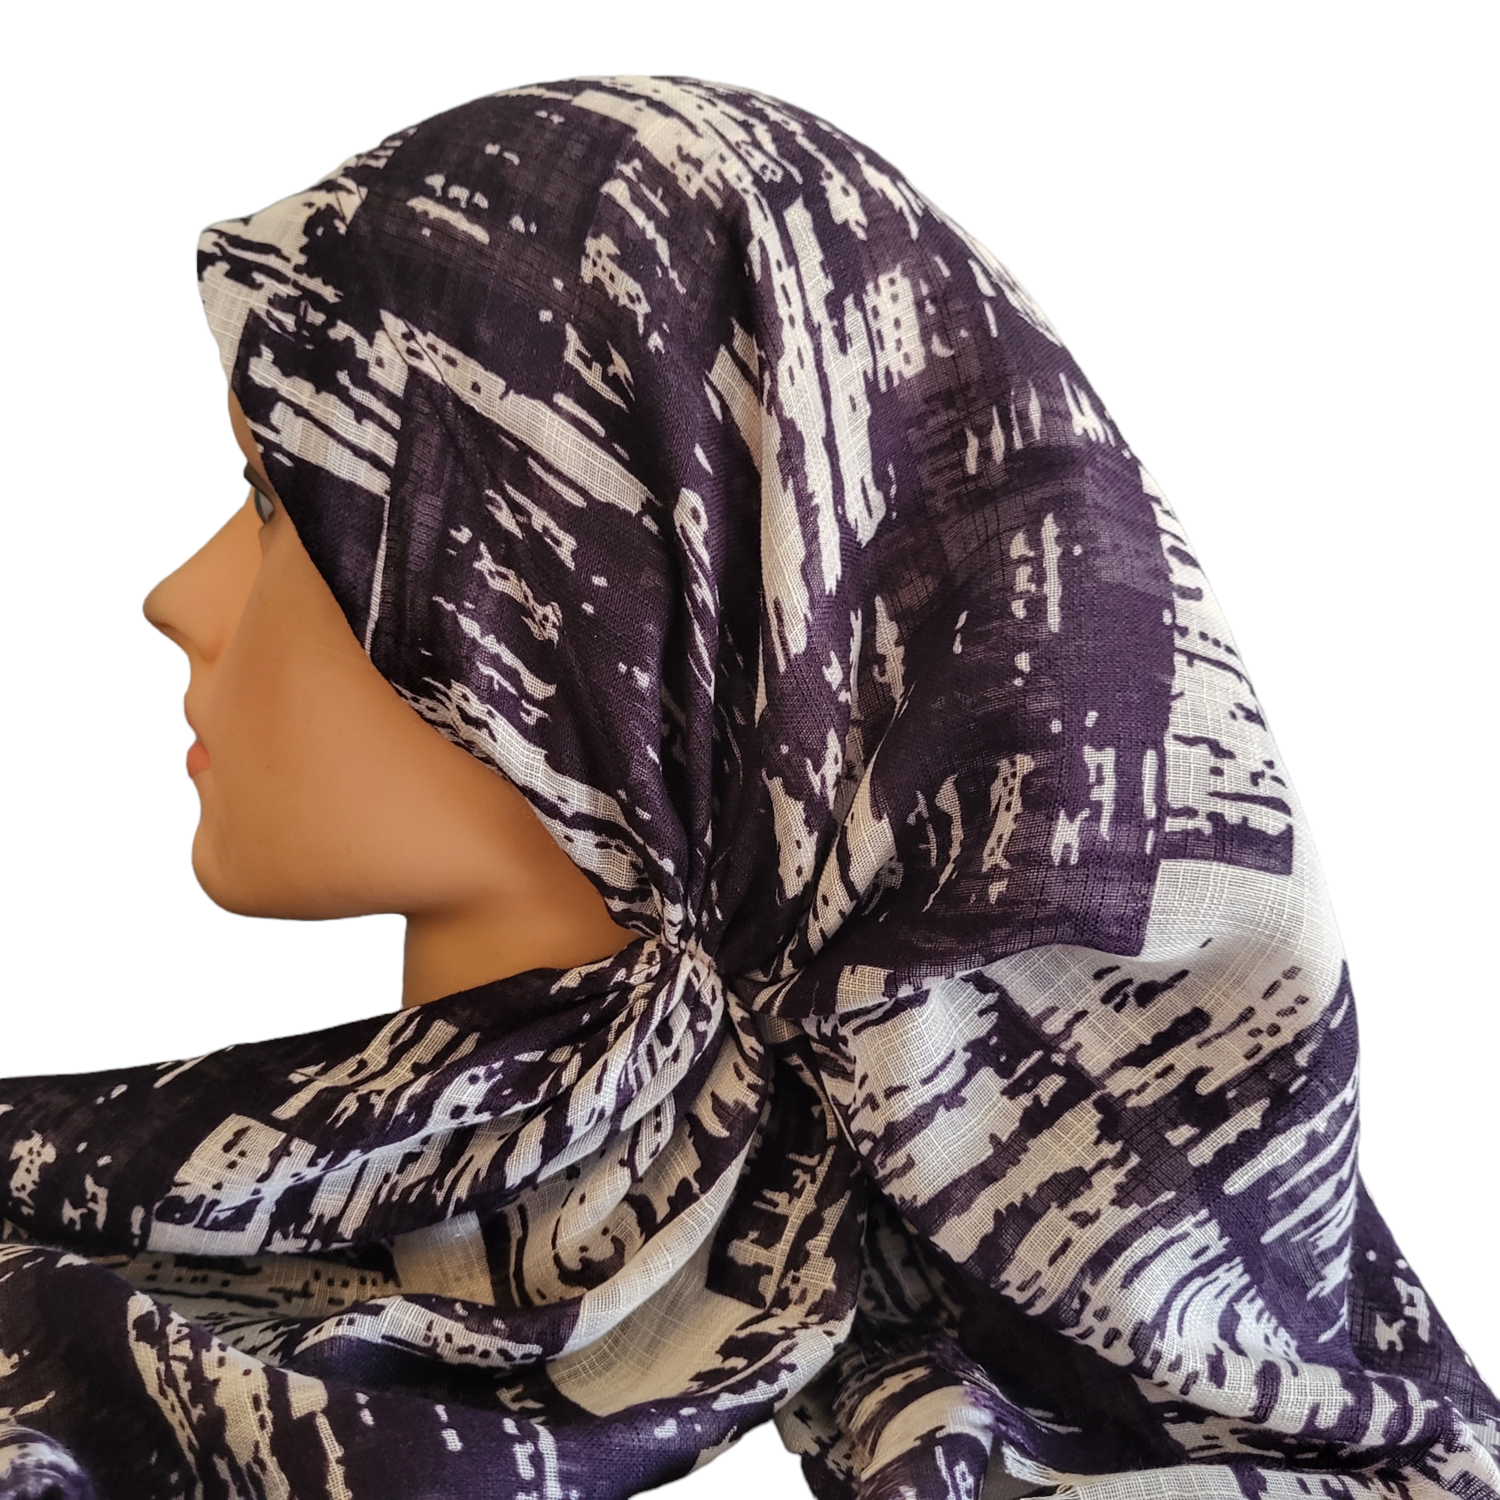 Eggplant patterned - long back pre-tied kerchief w/band sewn in - soft fringed edges material